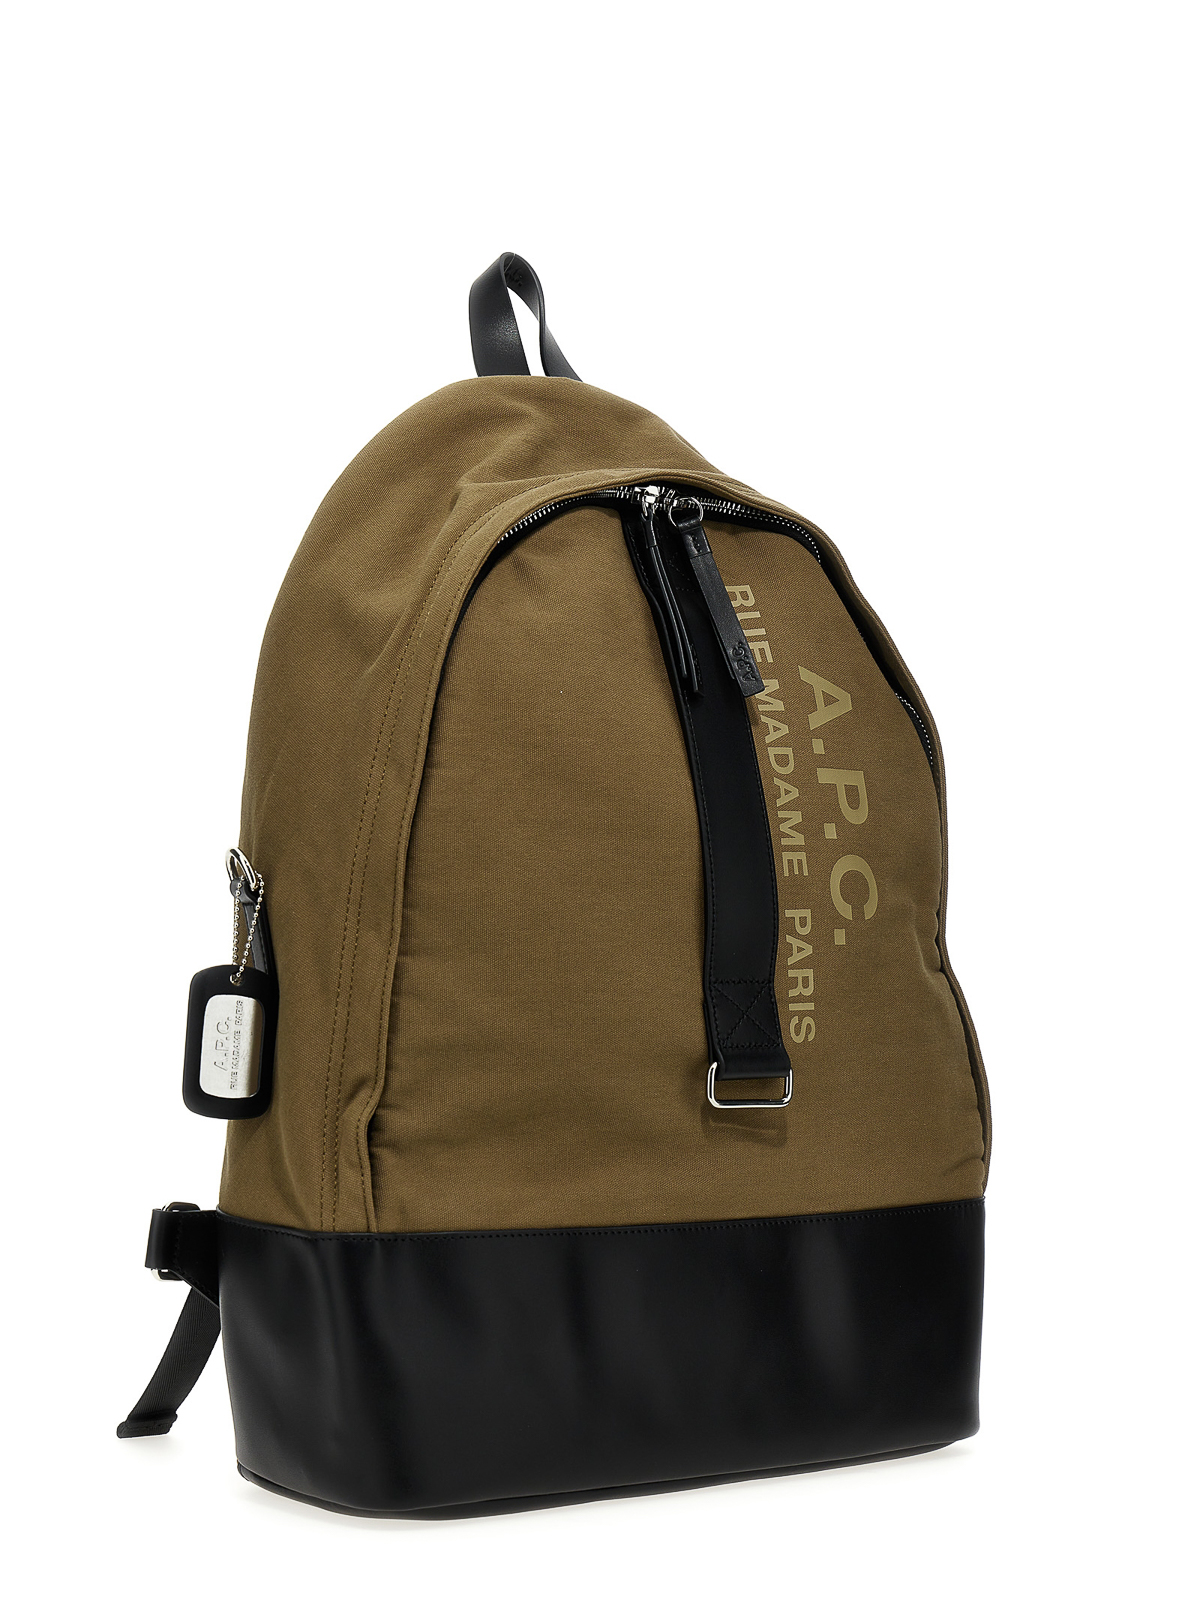 Looking for the Best Backpacks in Paris?